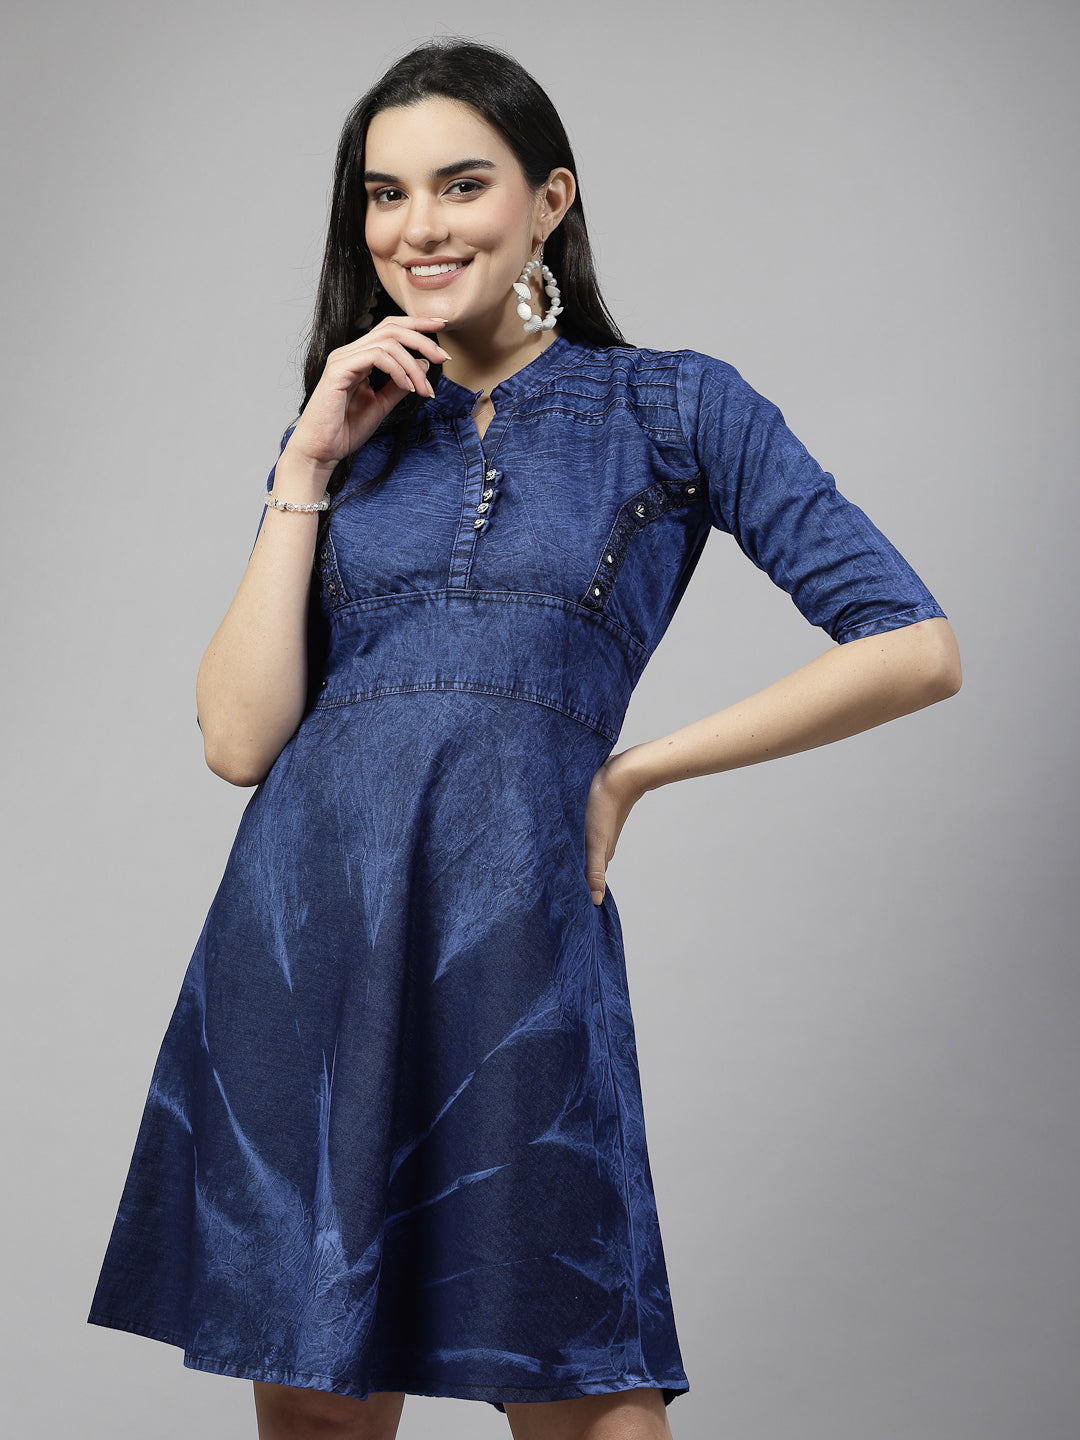 Chic Denim Delight: 3/4 Sleeve Round Collar Neck Kurta with Wooden Beads and Silver Stones, Belted for Comfortable Fit"